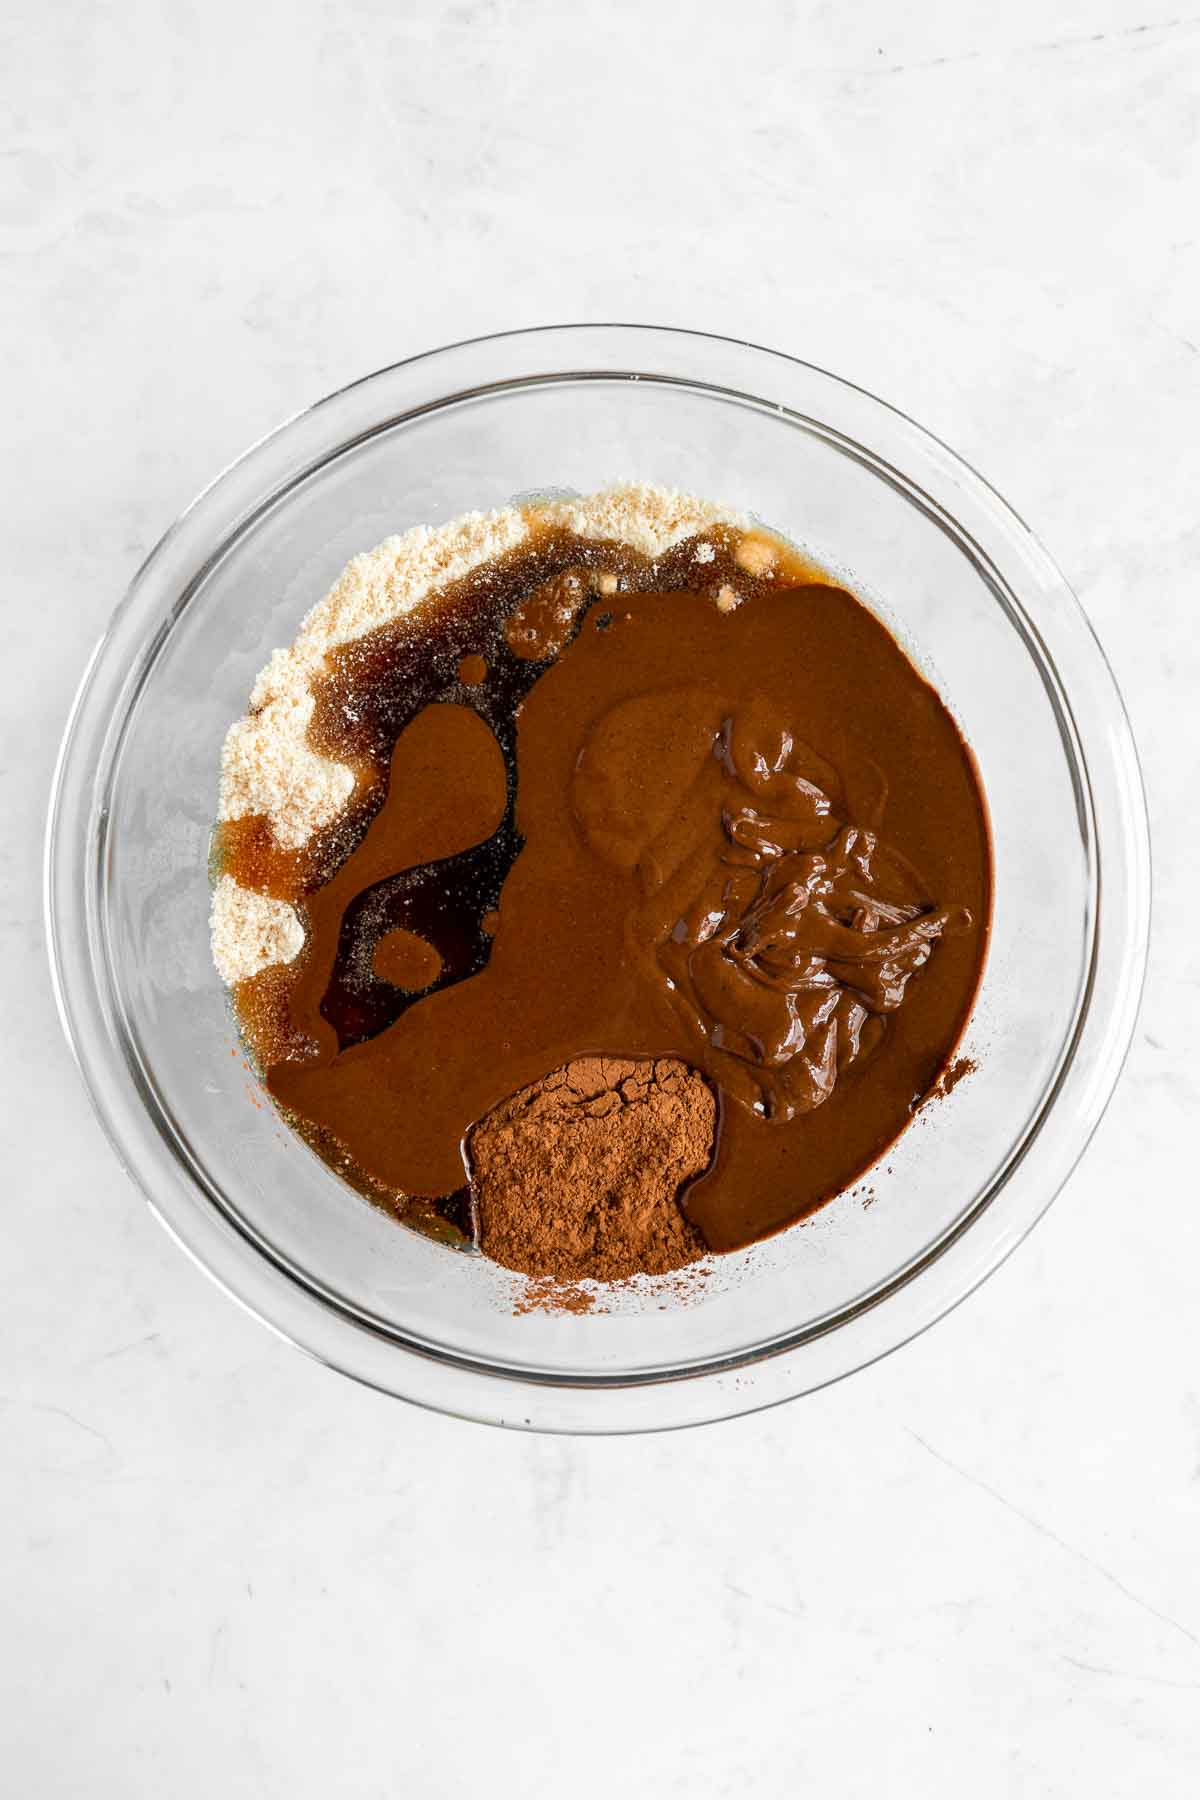 almond flour, hazelnut butter, maple syrup, cacao powder, and salt in a glass mixing bowl